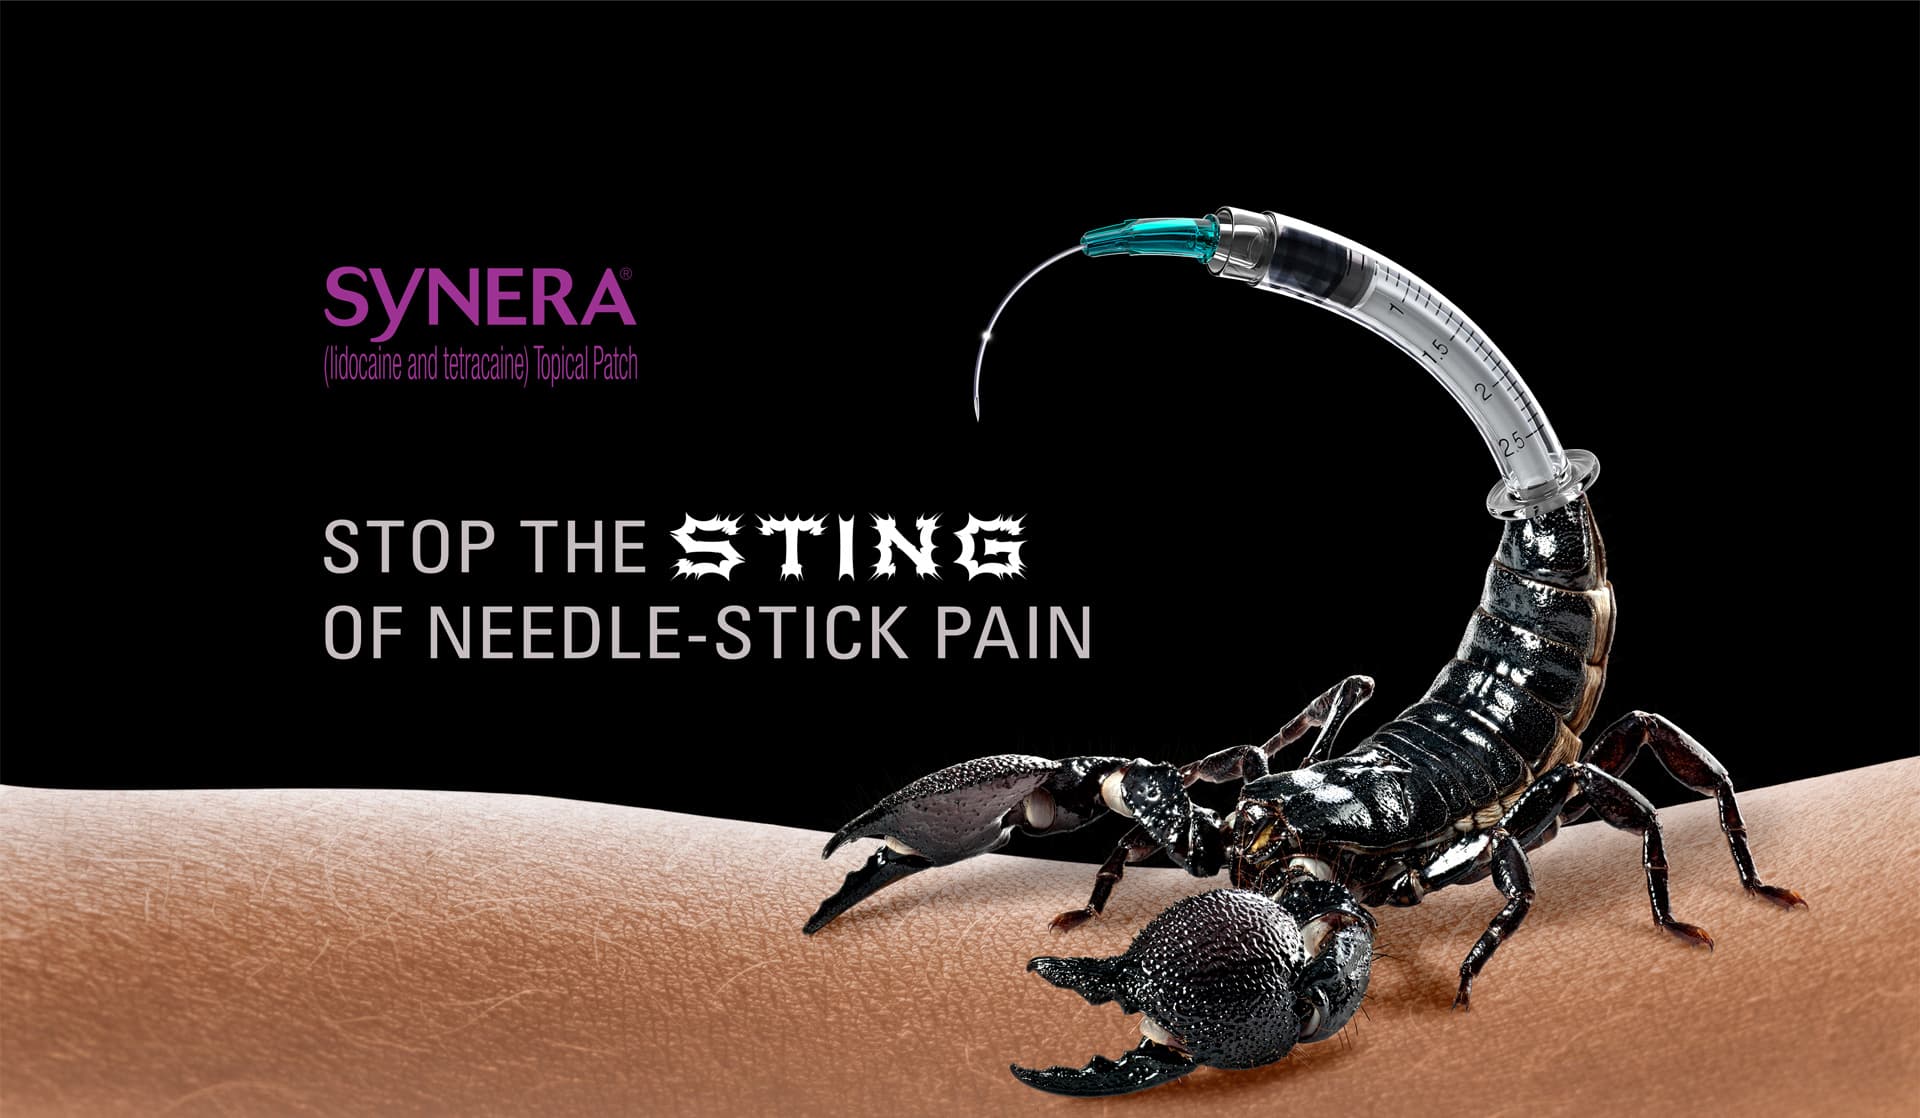 SYNERA (lidocaine and tetracaine) Topical Patch Stop the Sting of Needle-Stick Pain